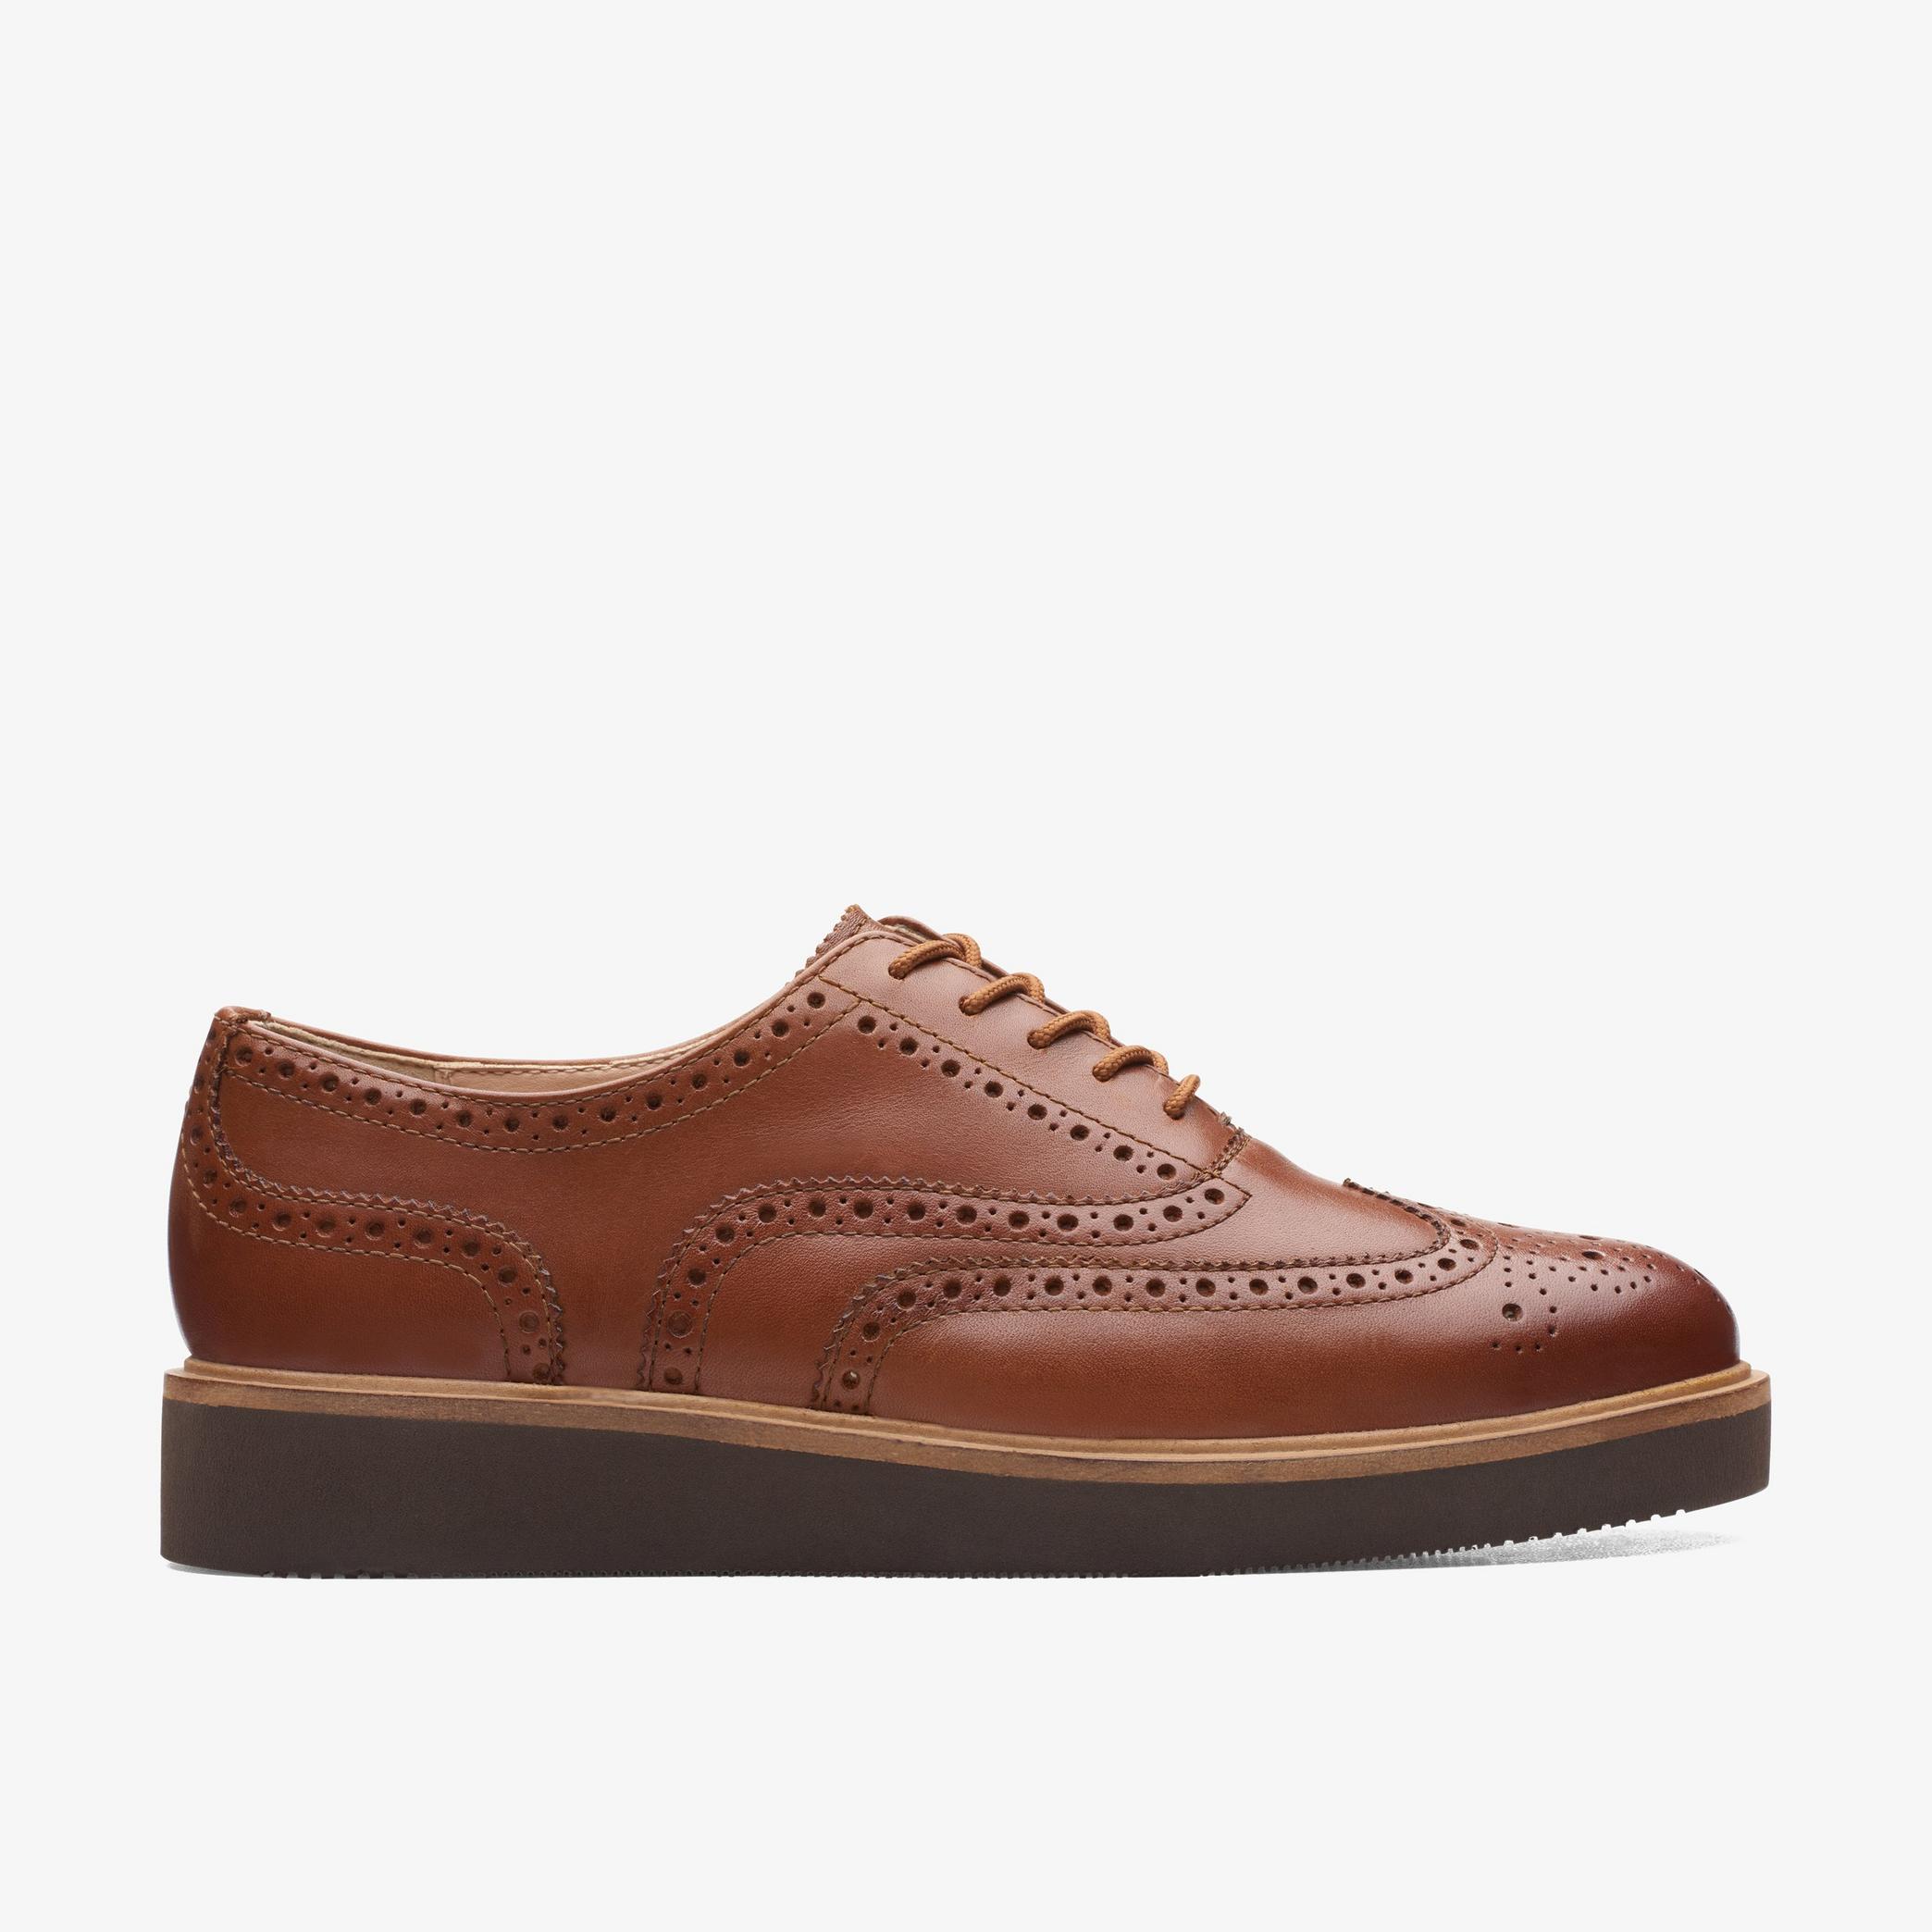 Glickly Brogue Dark Tan Leather Brogues, view 1 of 6